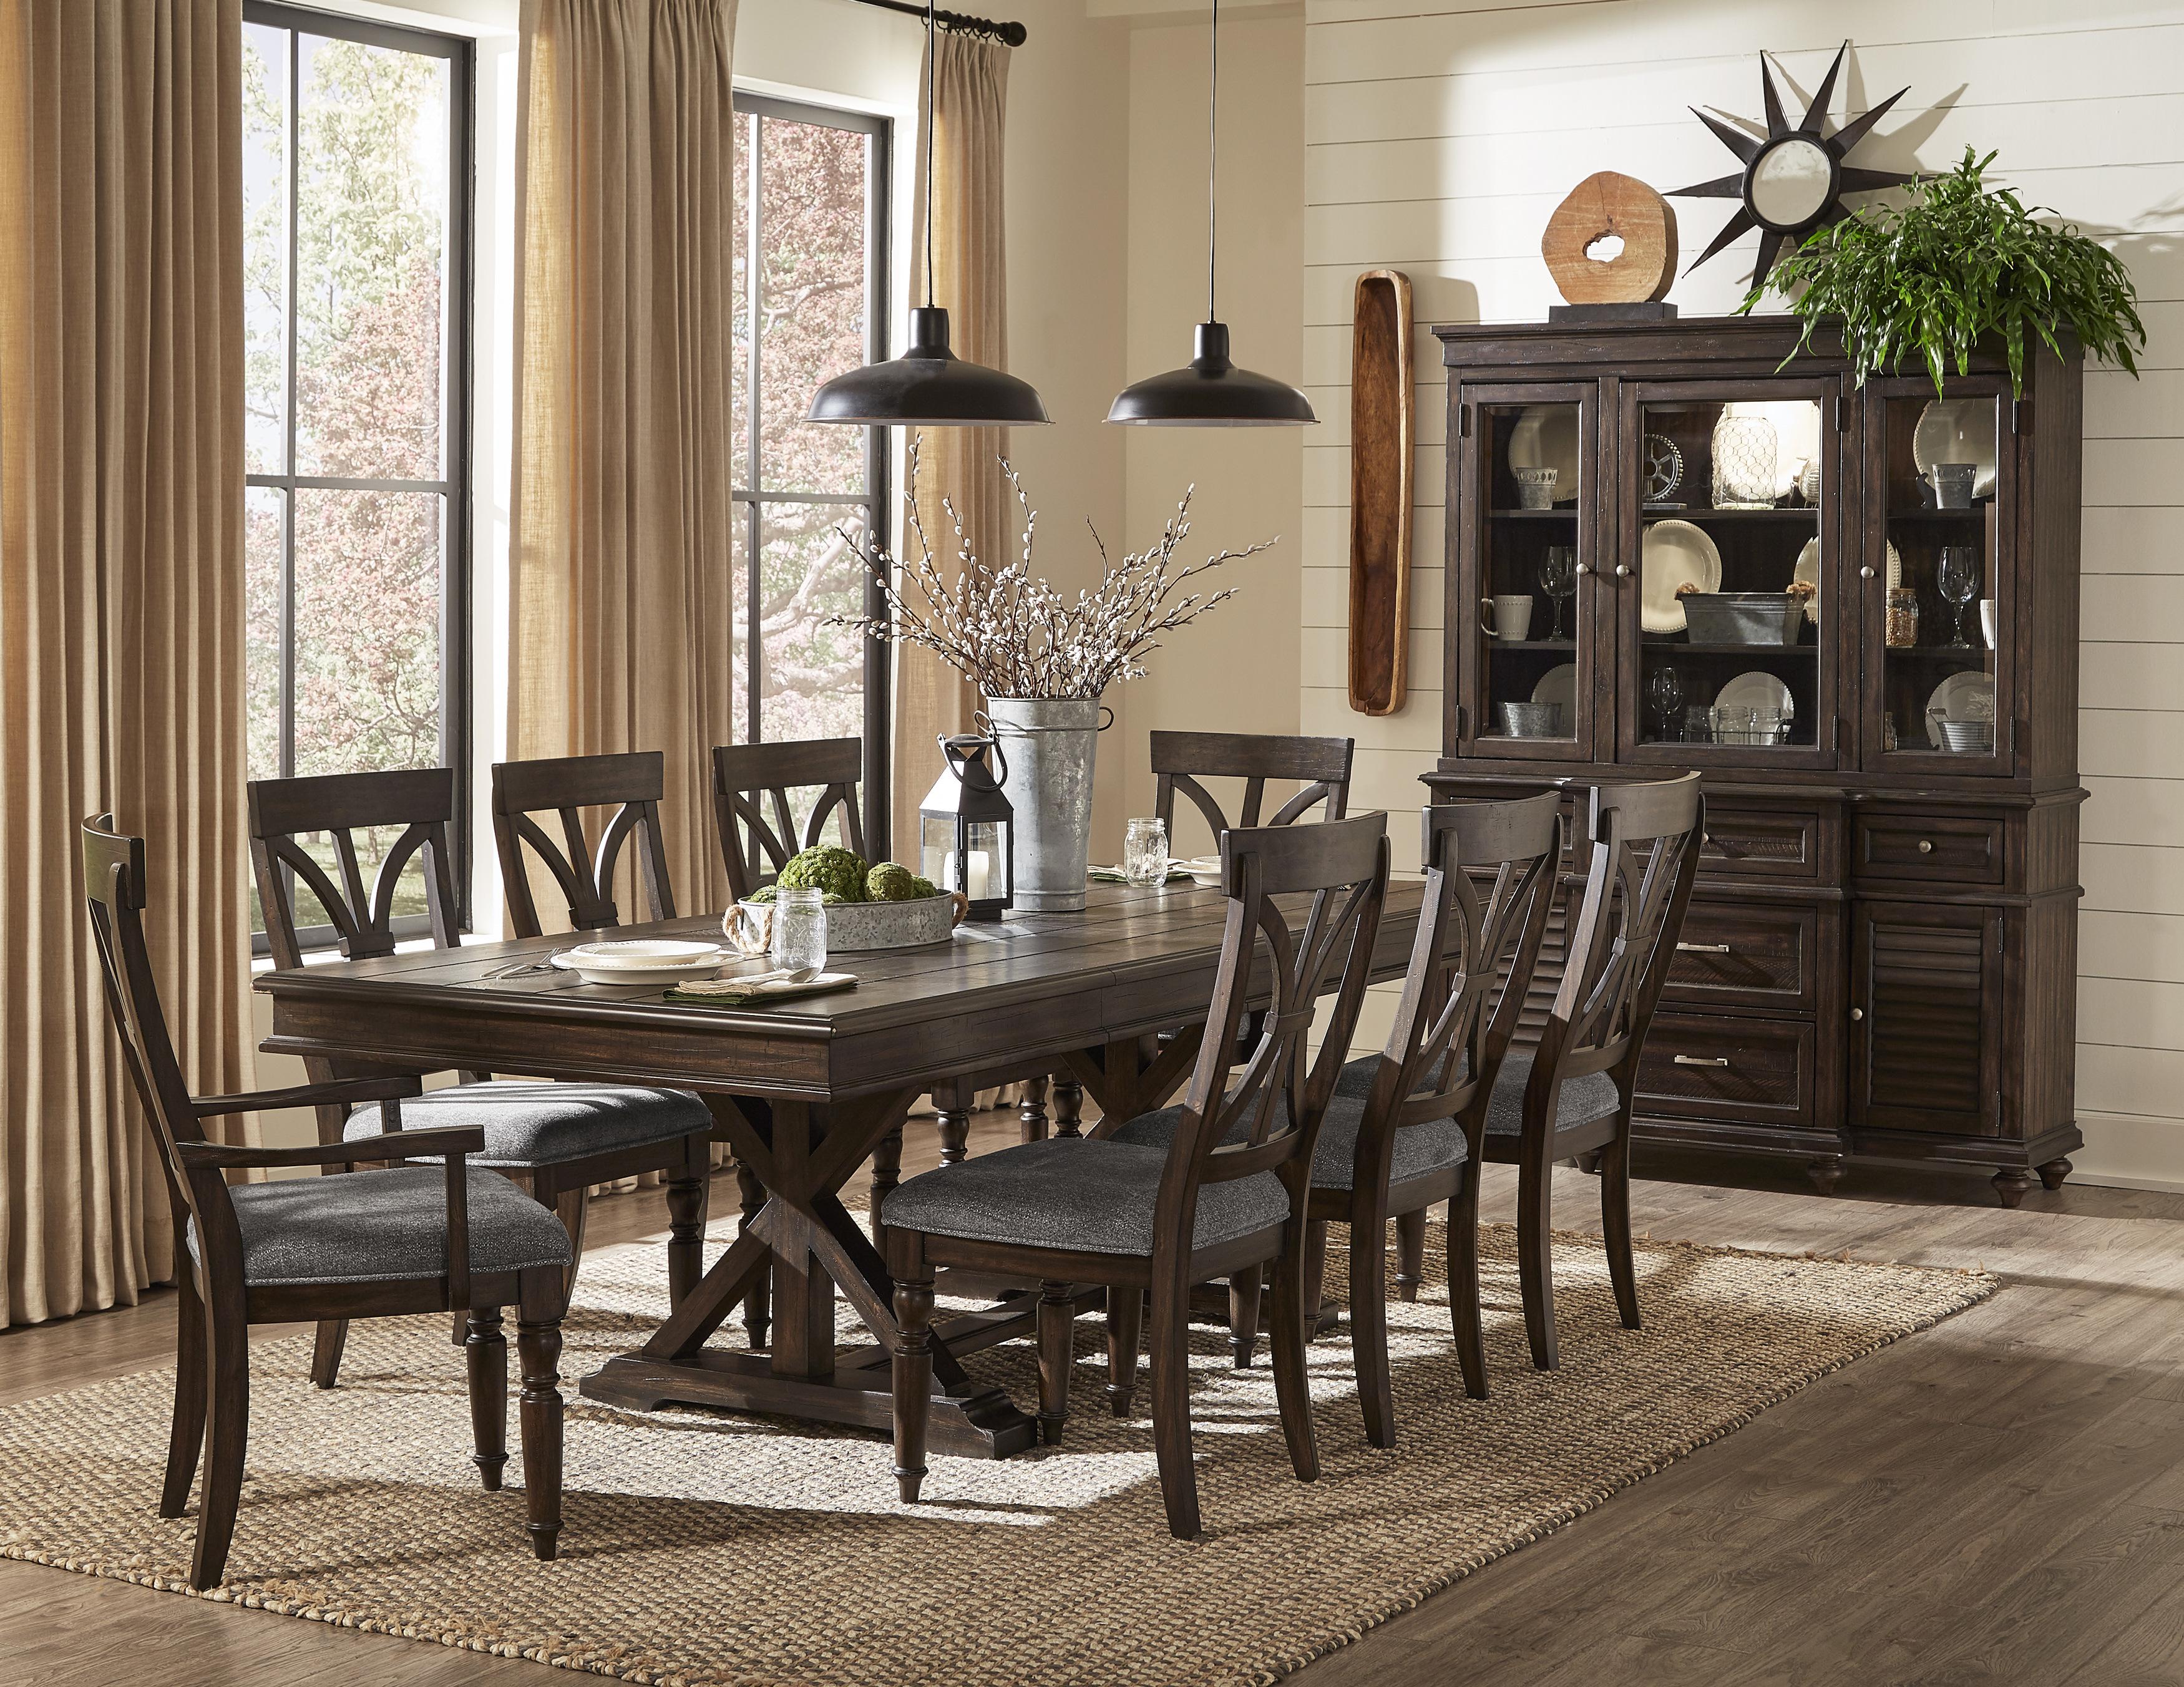 Transitional Dining Room Set 1689-96*10PC Cardano 1689-96*10PC in Charcoal Polyester